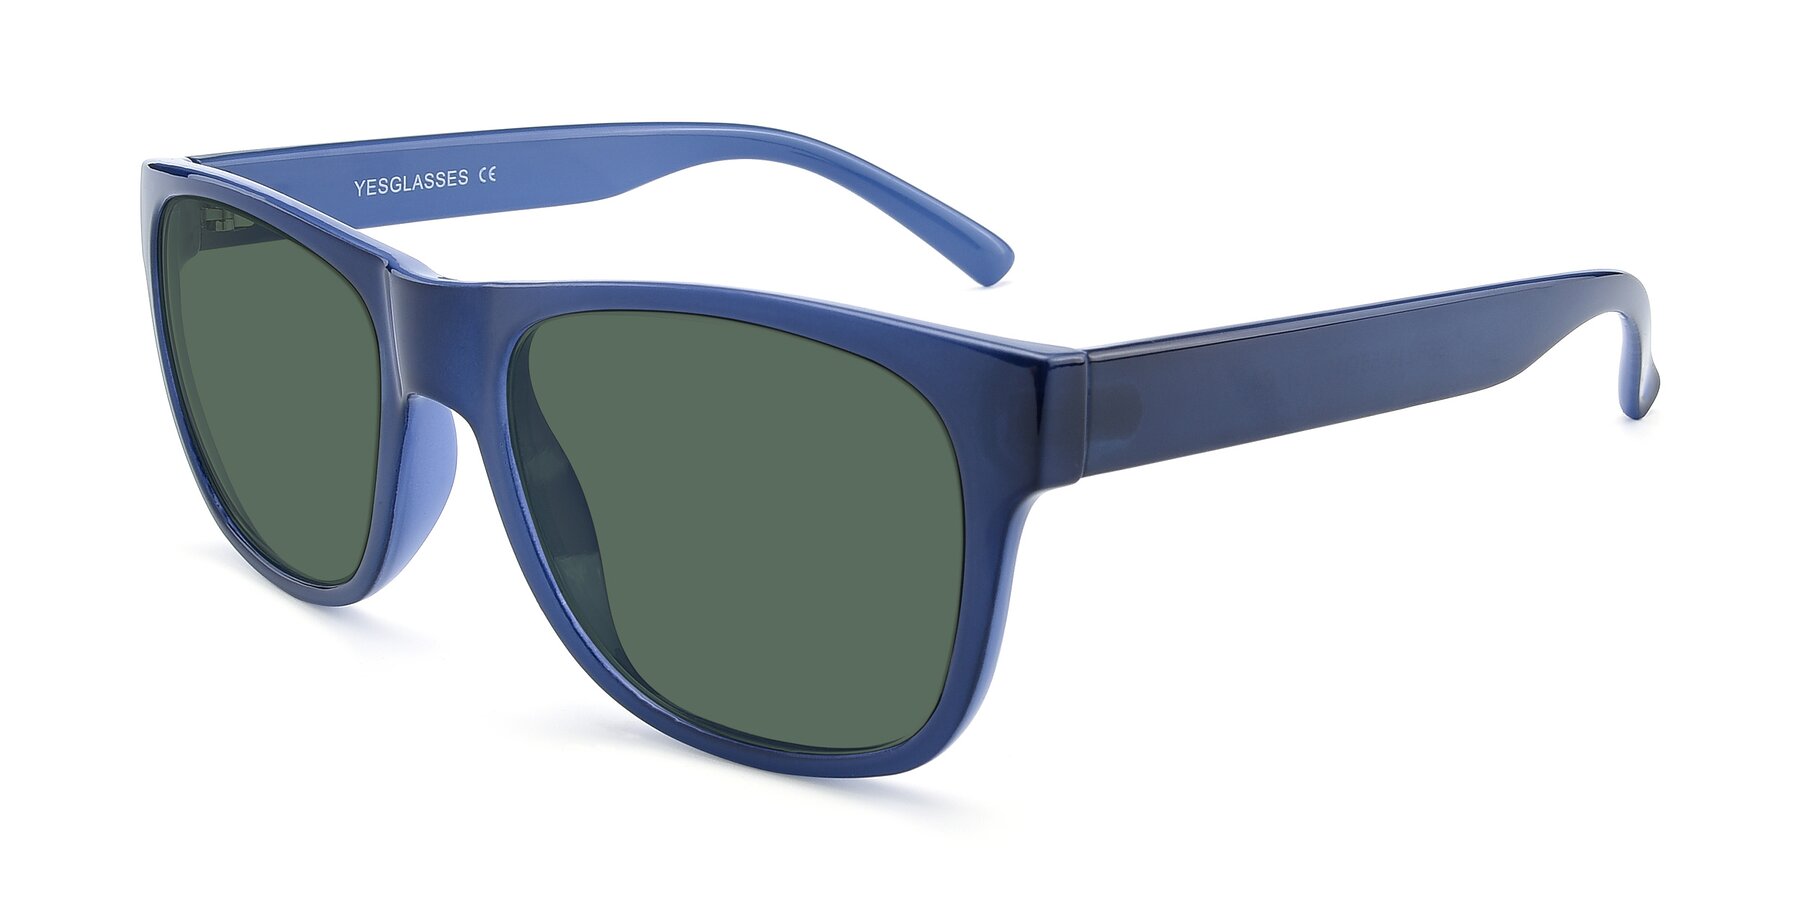 Angle of SSR213 in Blue with Green Polarized Lenses